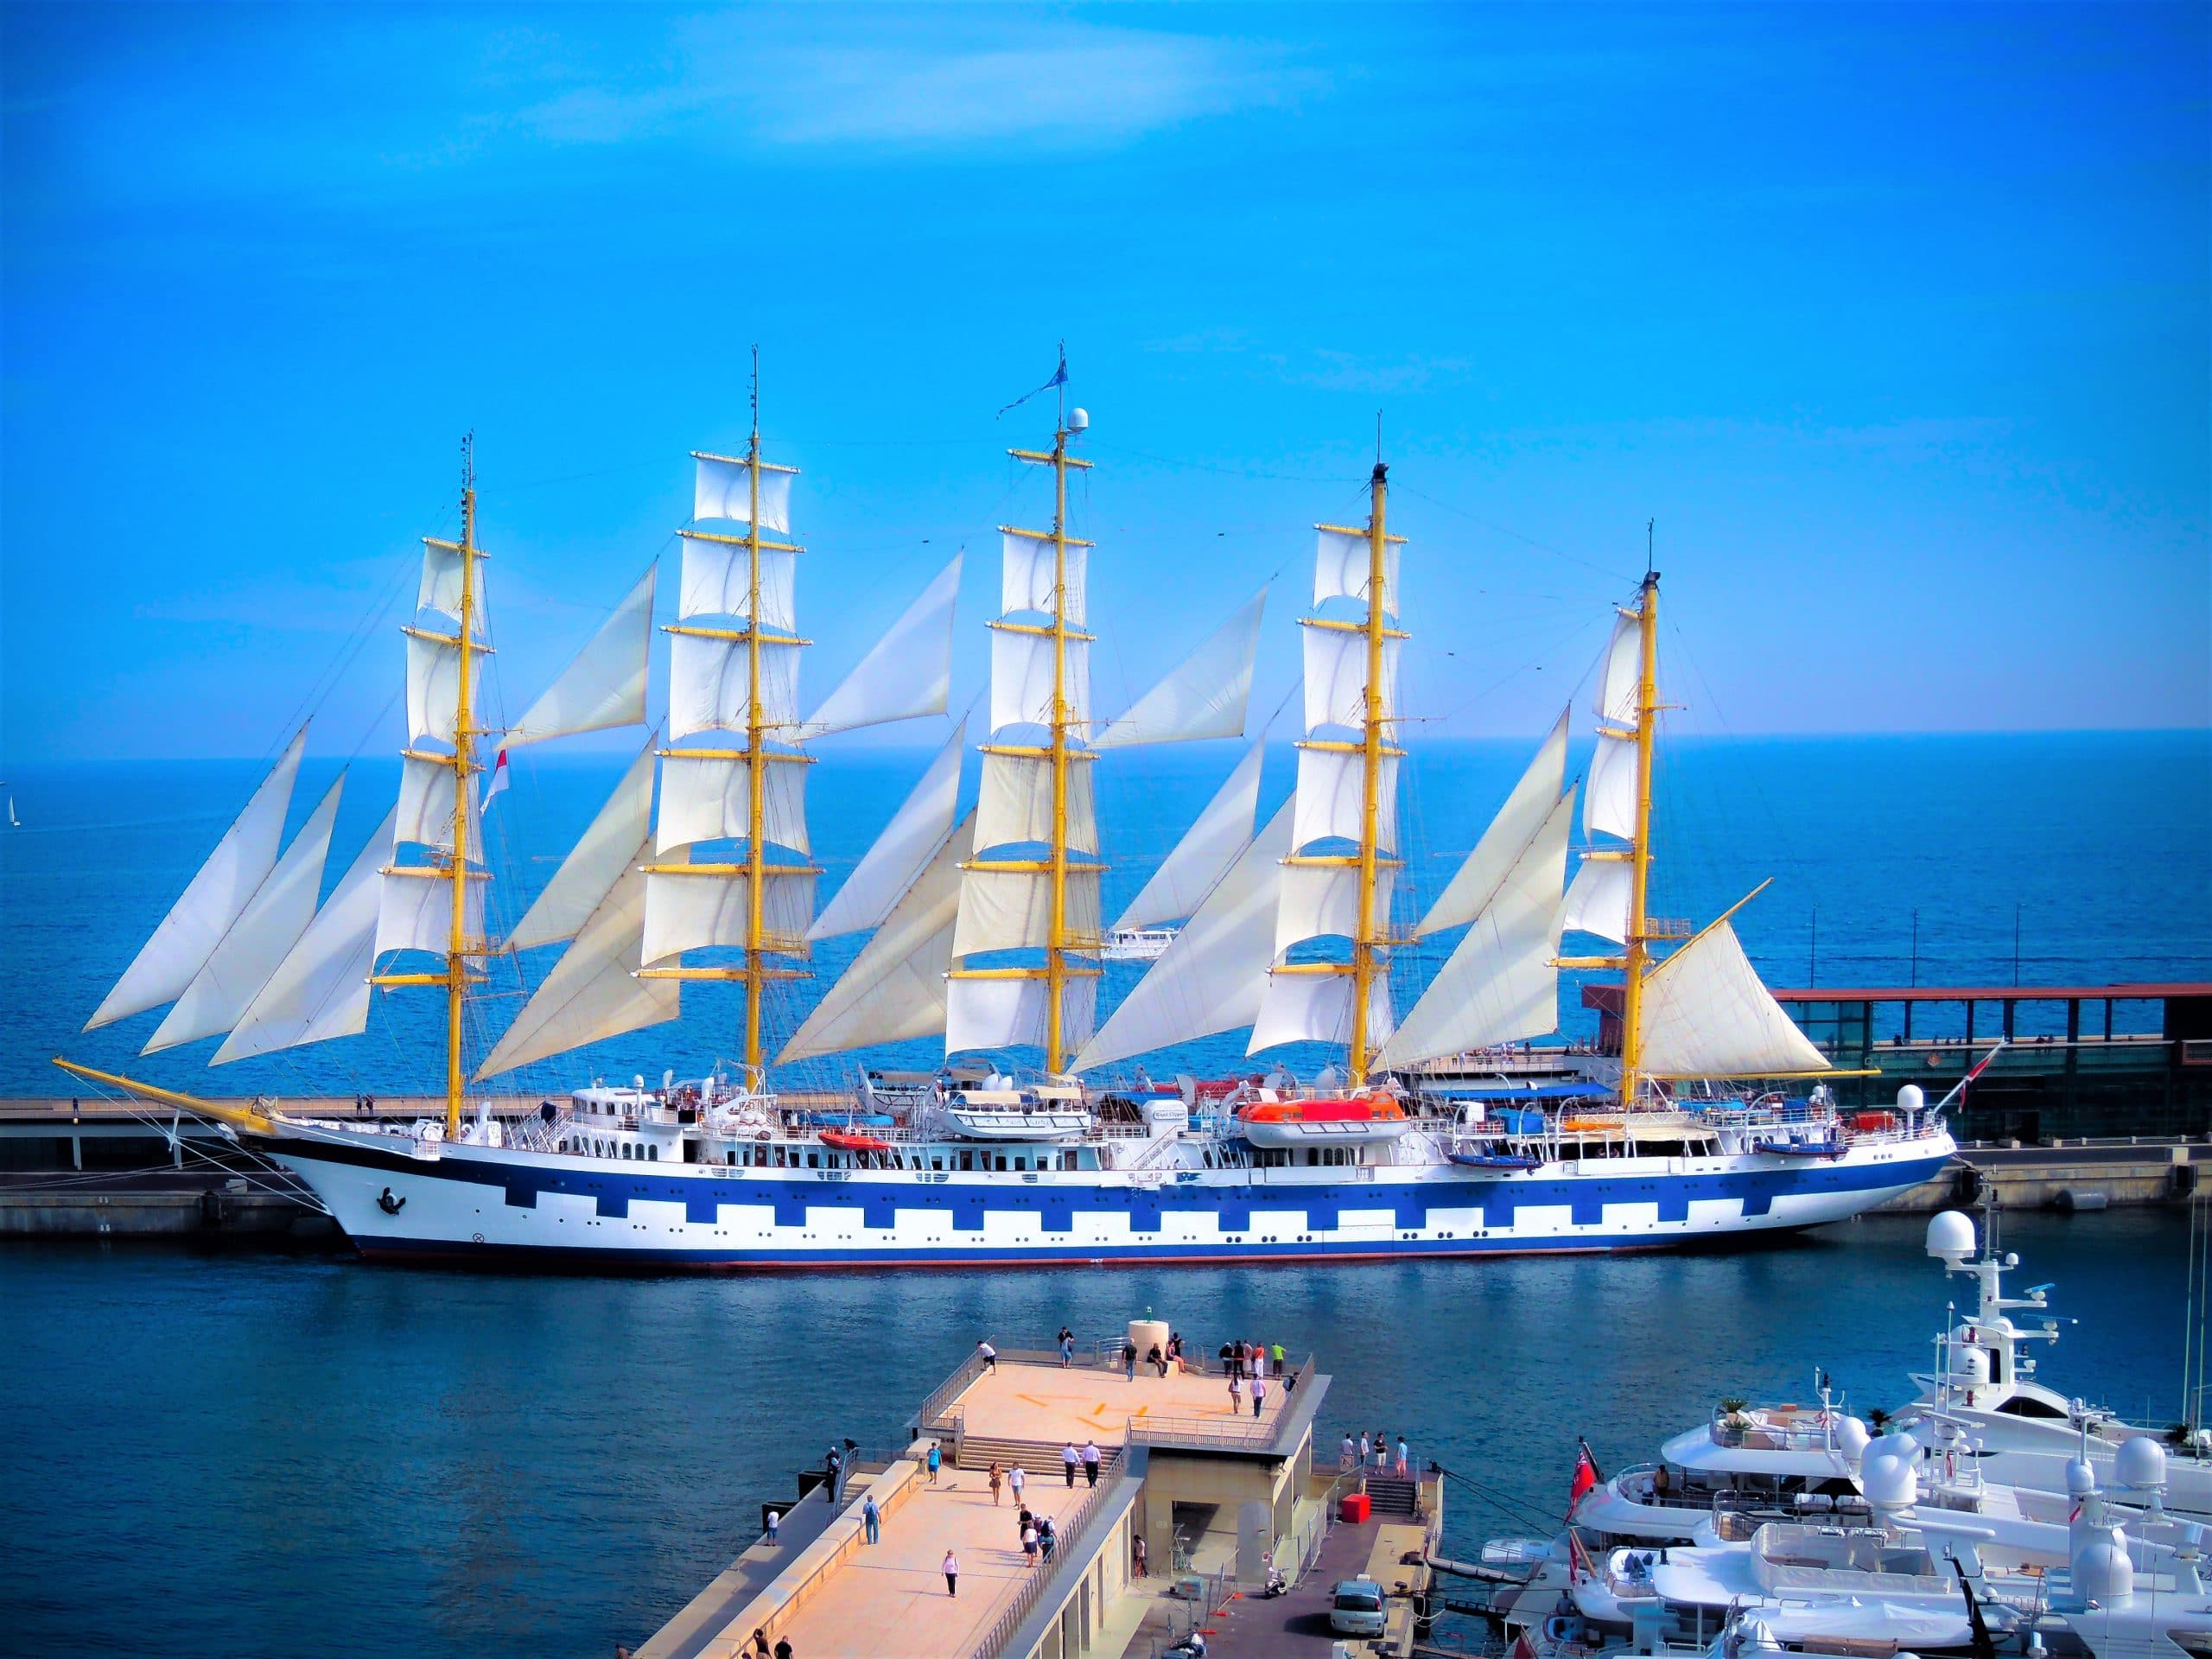 The World's Largest Full-Rigged Sailing Ship (21 Photos) » TwistedSifter